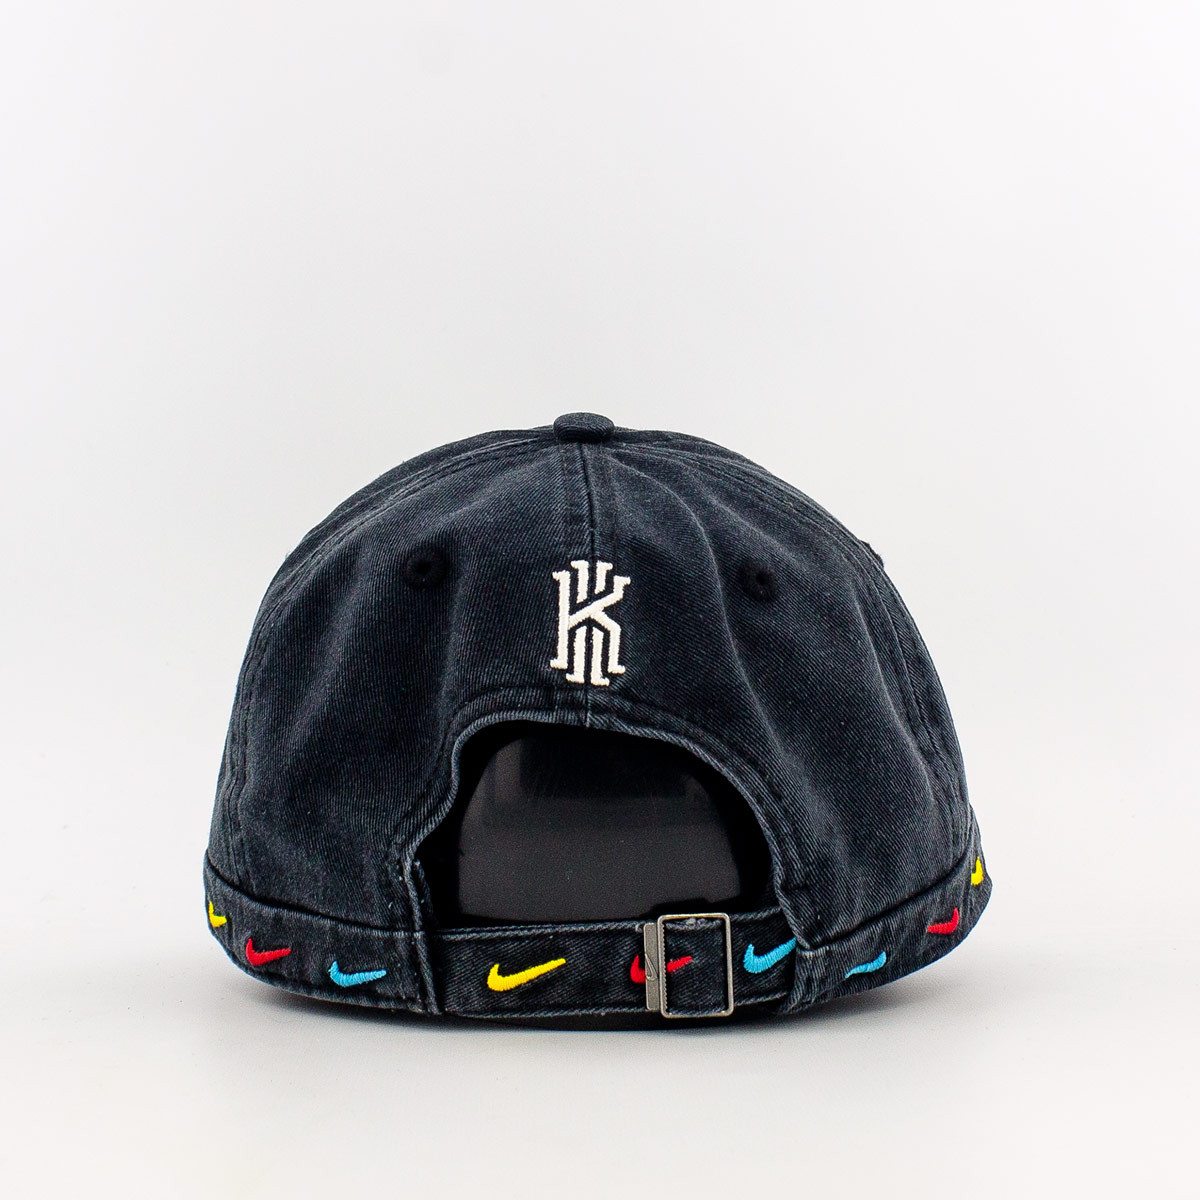 kyrie irving friends hat